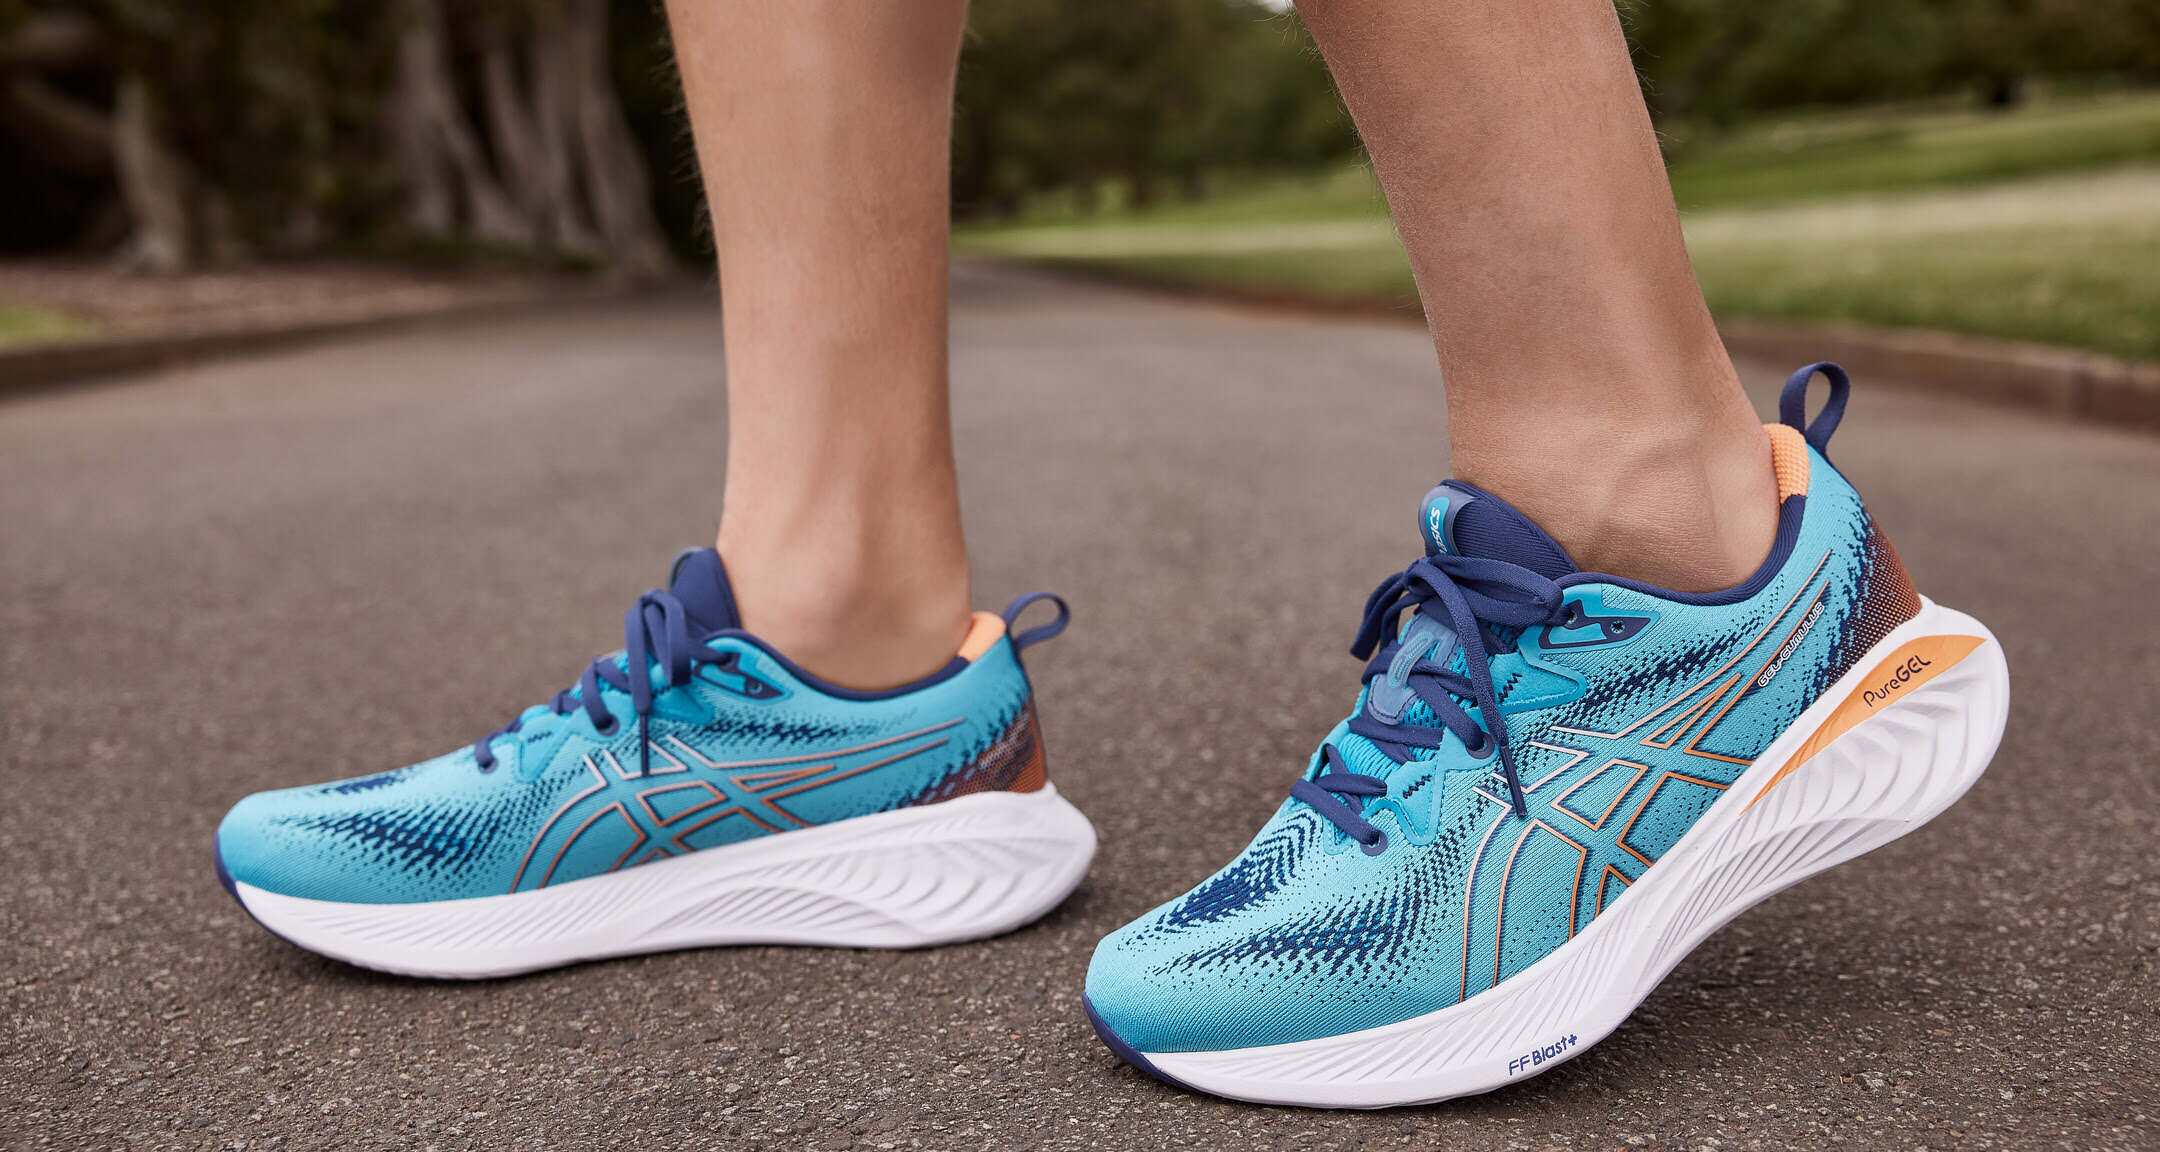 Choose the Best Running Shoes For Flat Feet